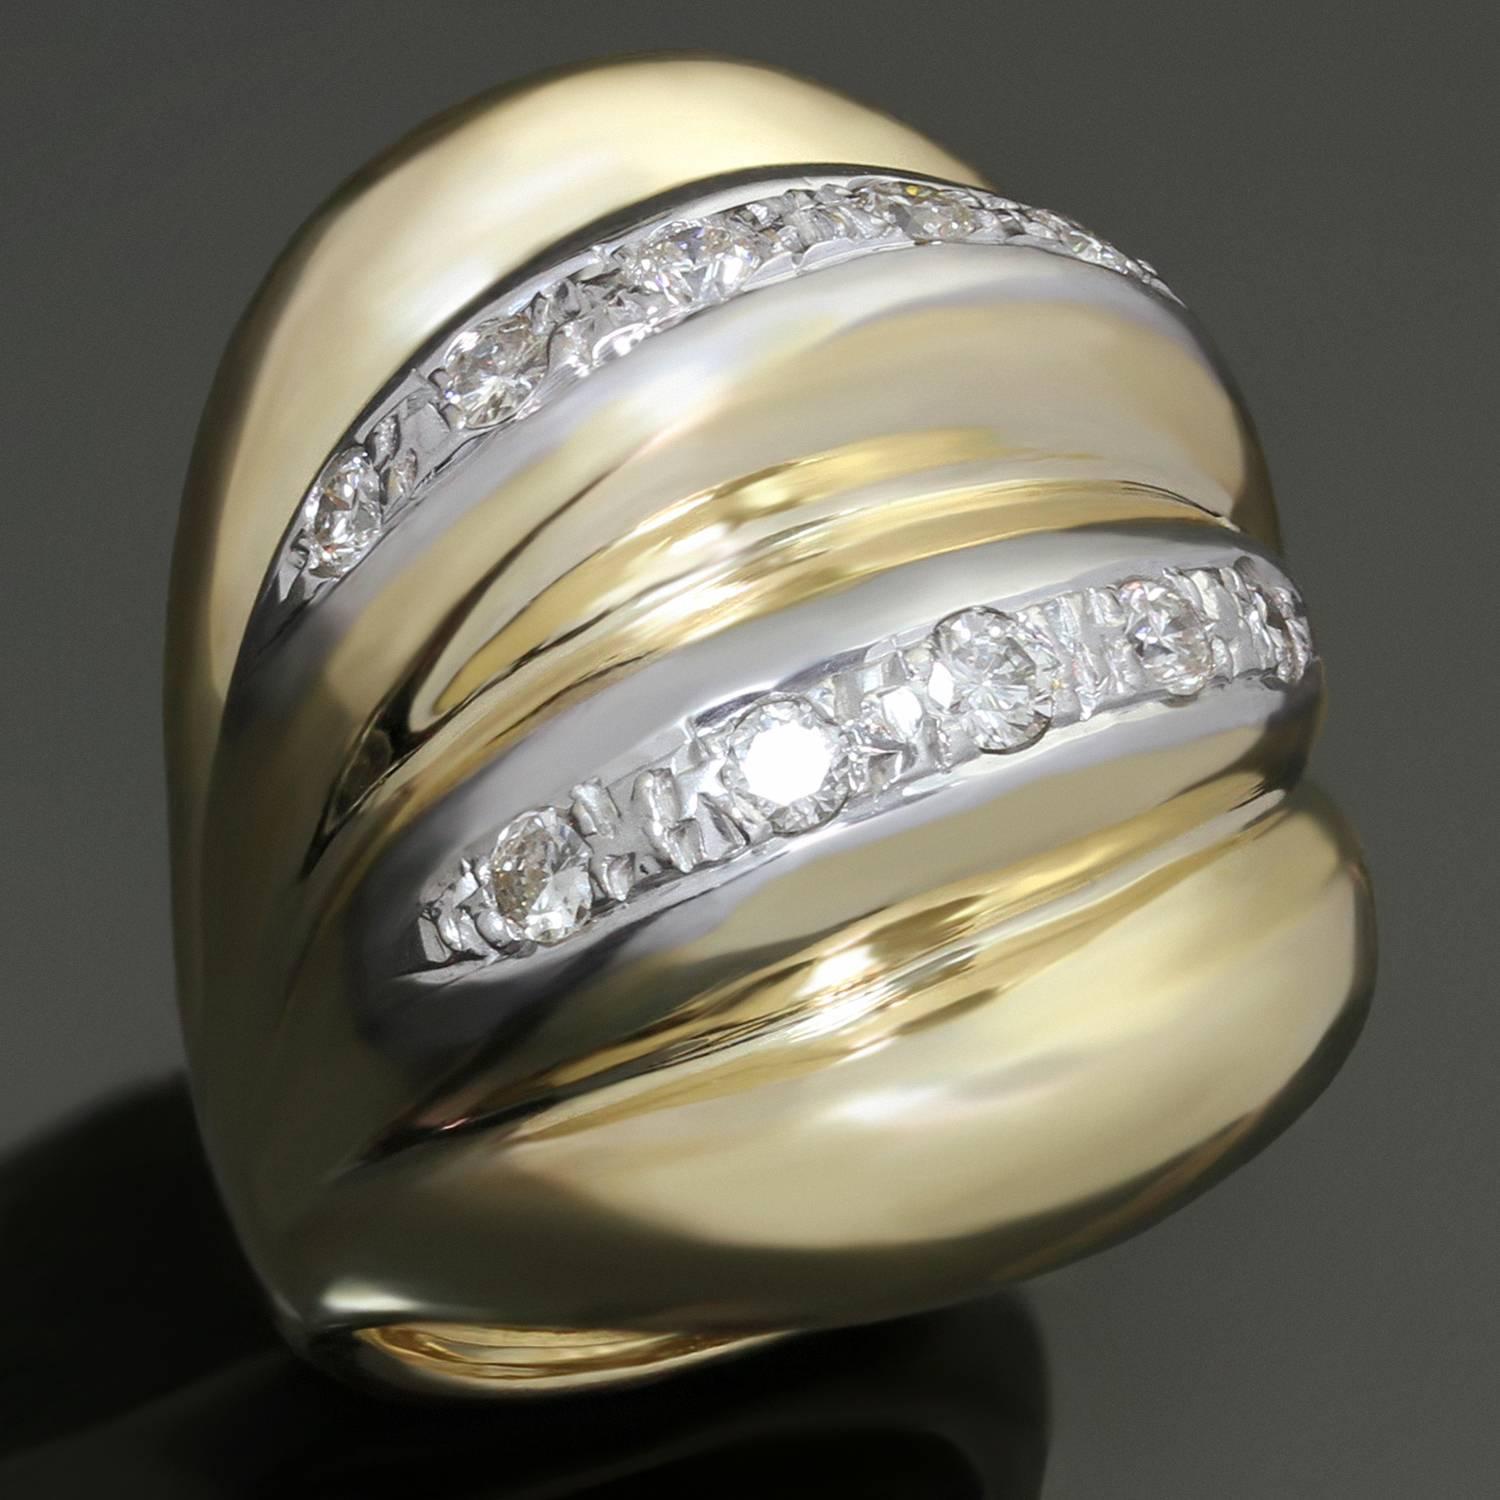 This fabulous vintage ring features a fluted dome design crafted in 14k yellow gold and accented with brilliant-cut round diamonds of an estimated 0.65 carats. Made in Russia circa 1970s. Measurements: 0.86